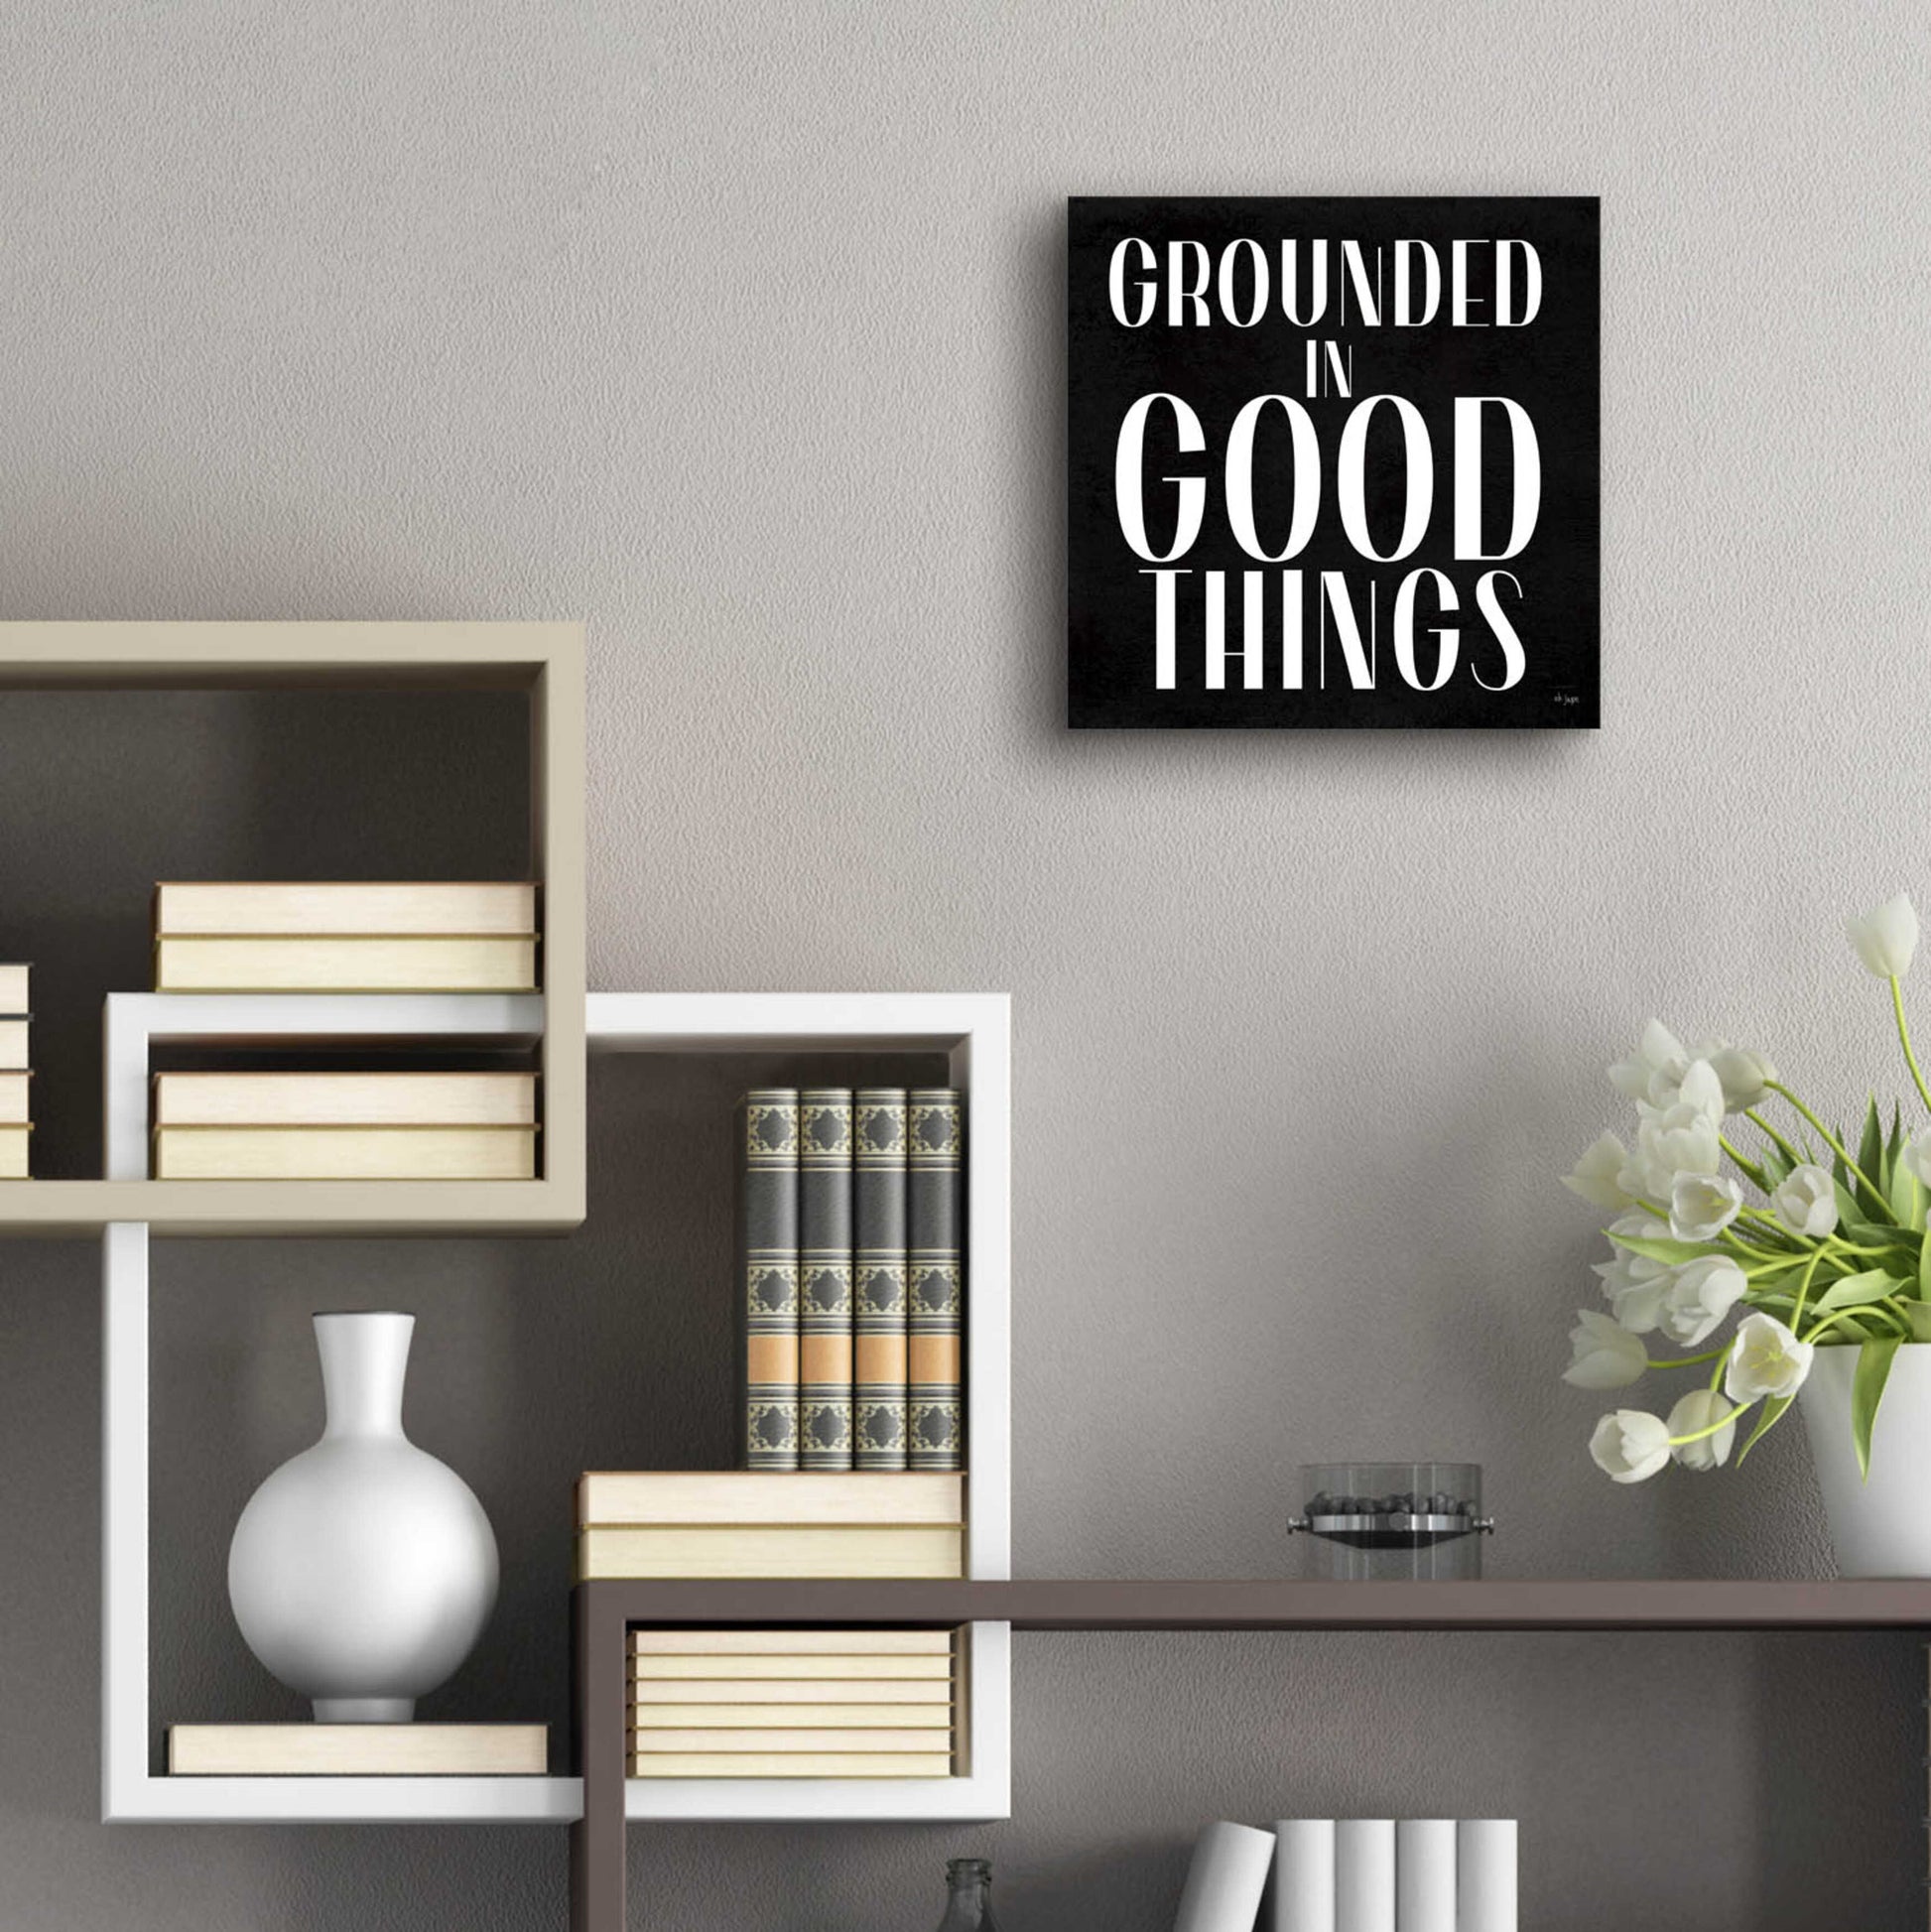 Epic Art 'Grounded in Good Things' by Jaxn Blvd., Acrylic Glass Wall Art,12x12